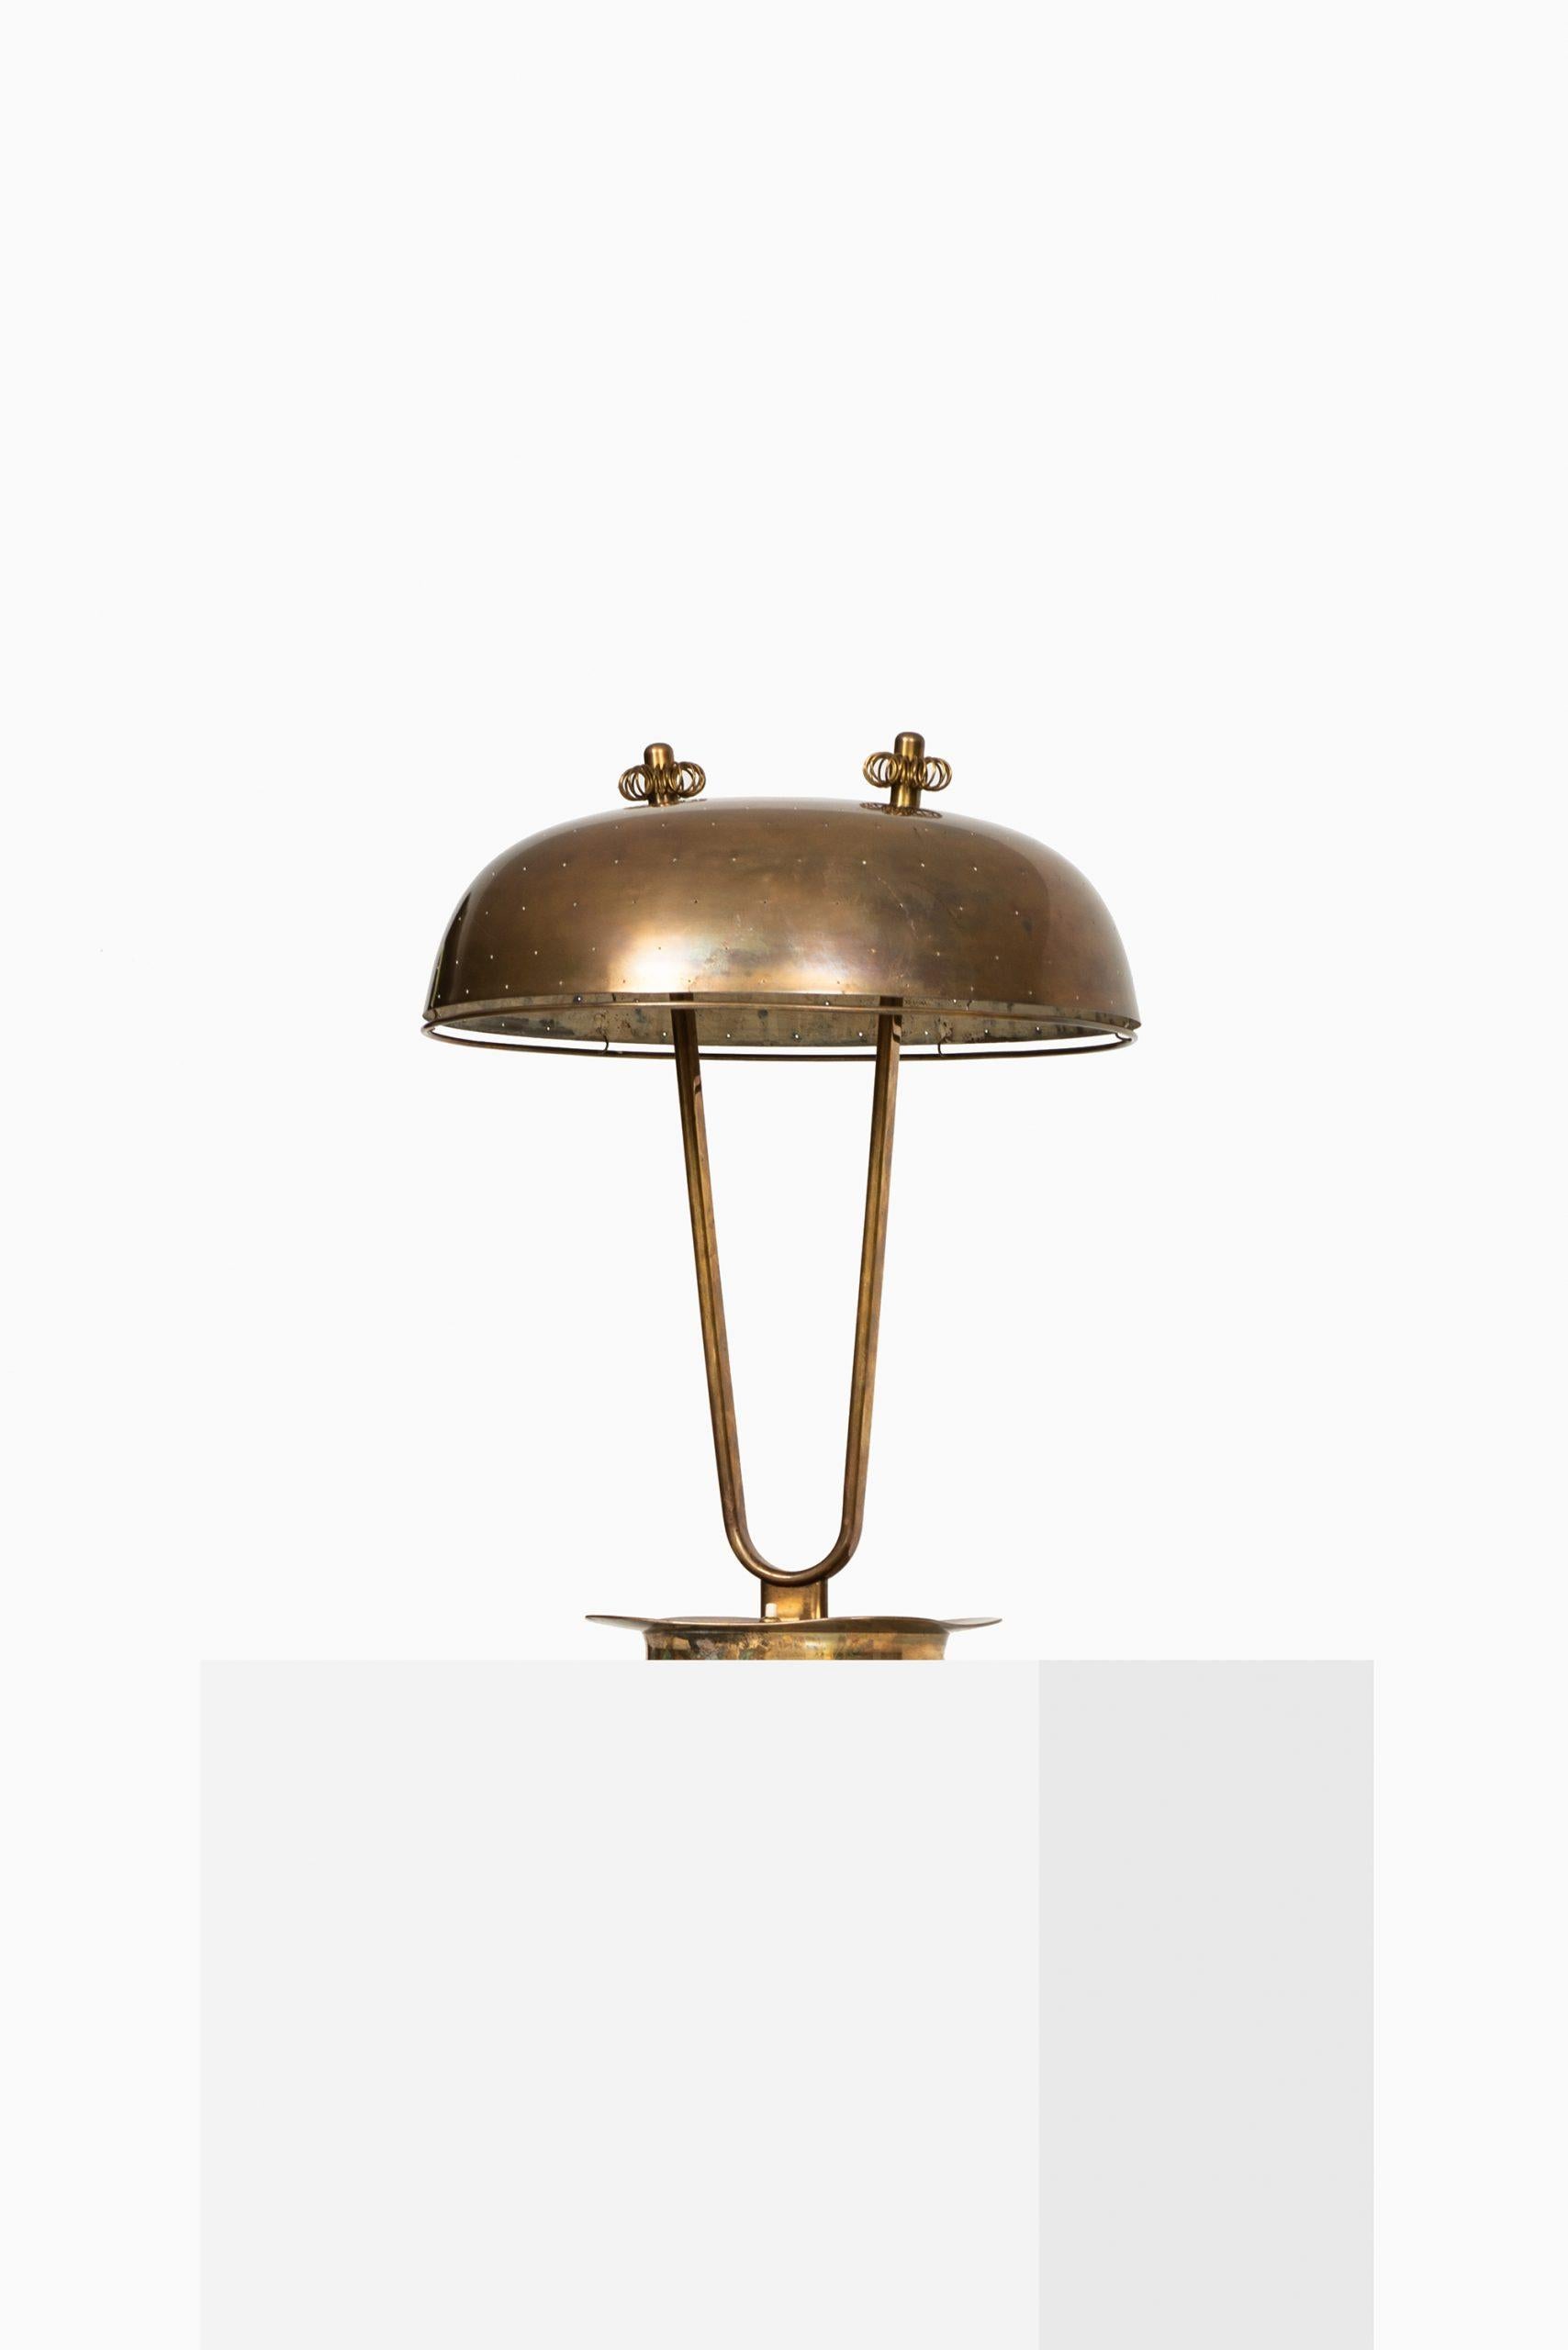 Finnish Paavo Tynell Table Lamp Produced by Taito Oy in Finland